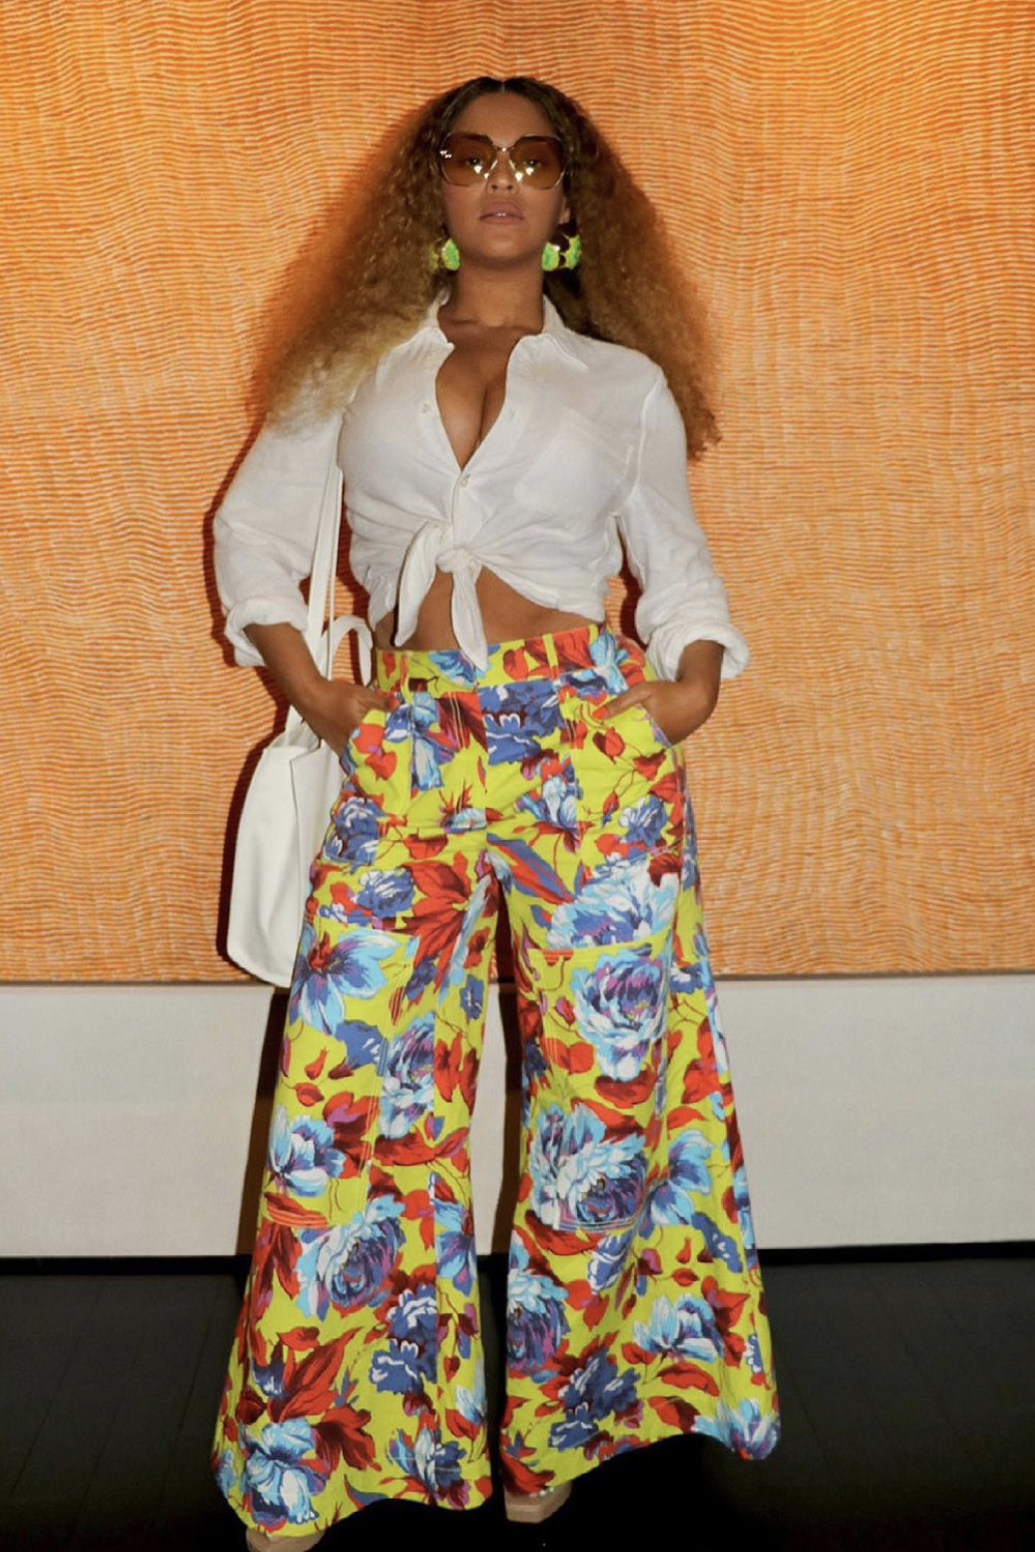 Beyonce Gives a Style Moment While Out in NYC With Jay Z Rocking Black Designer Pieces Including Christopher John Rogers Floral Spring 2021 Pants and Telfar White Bag8